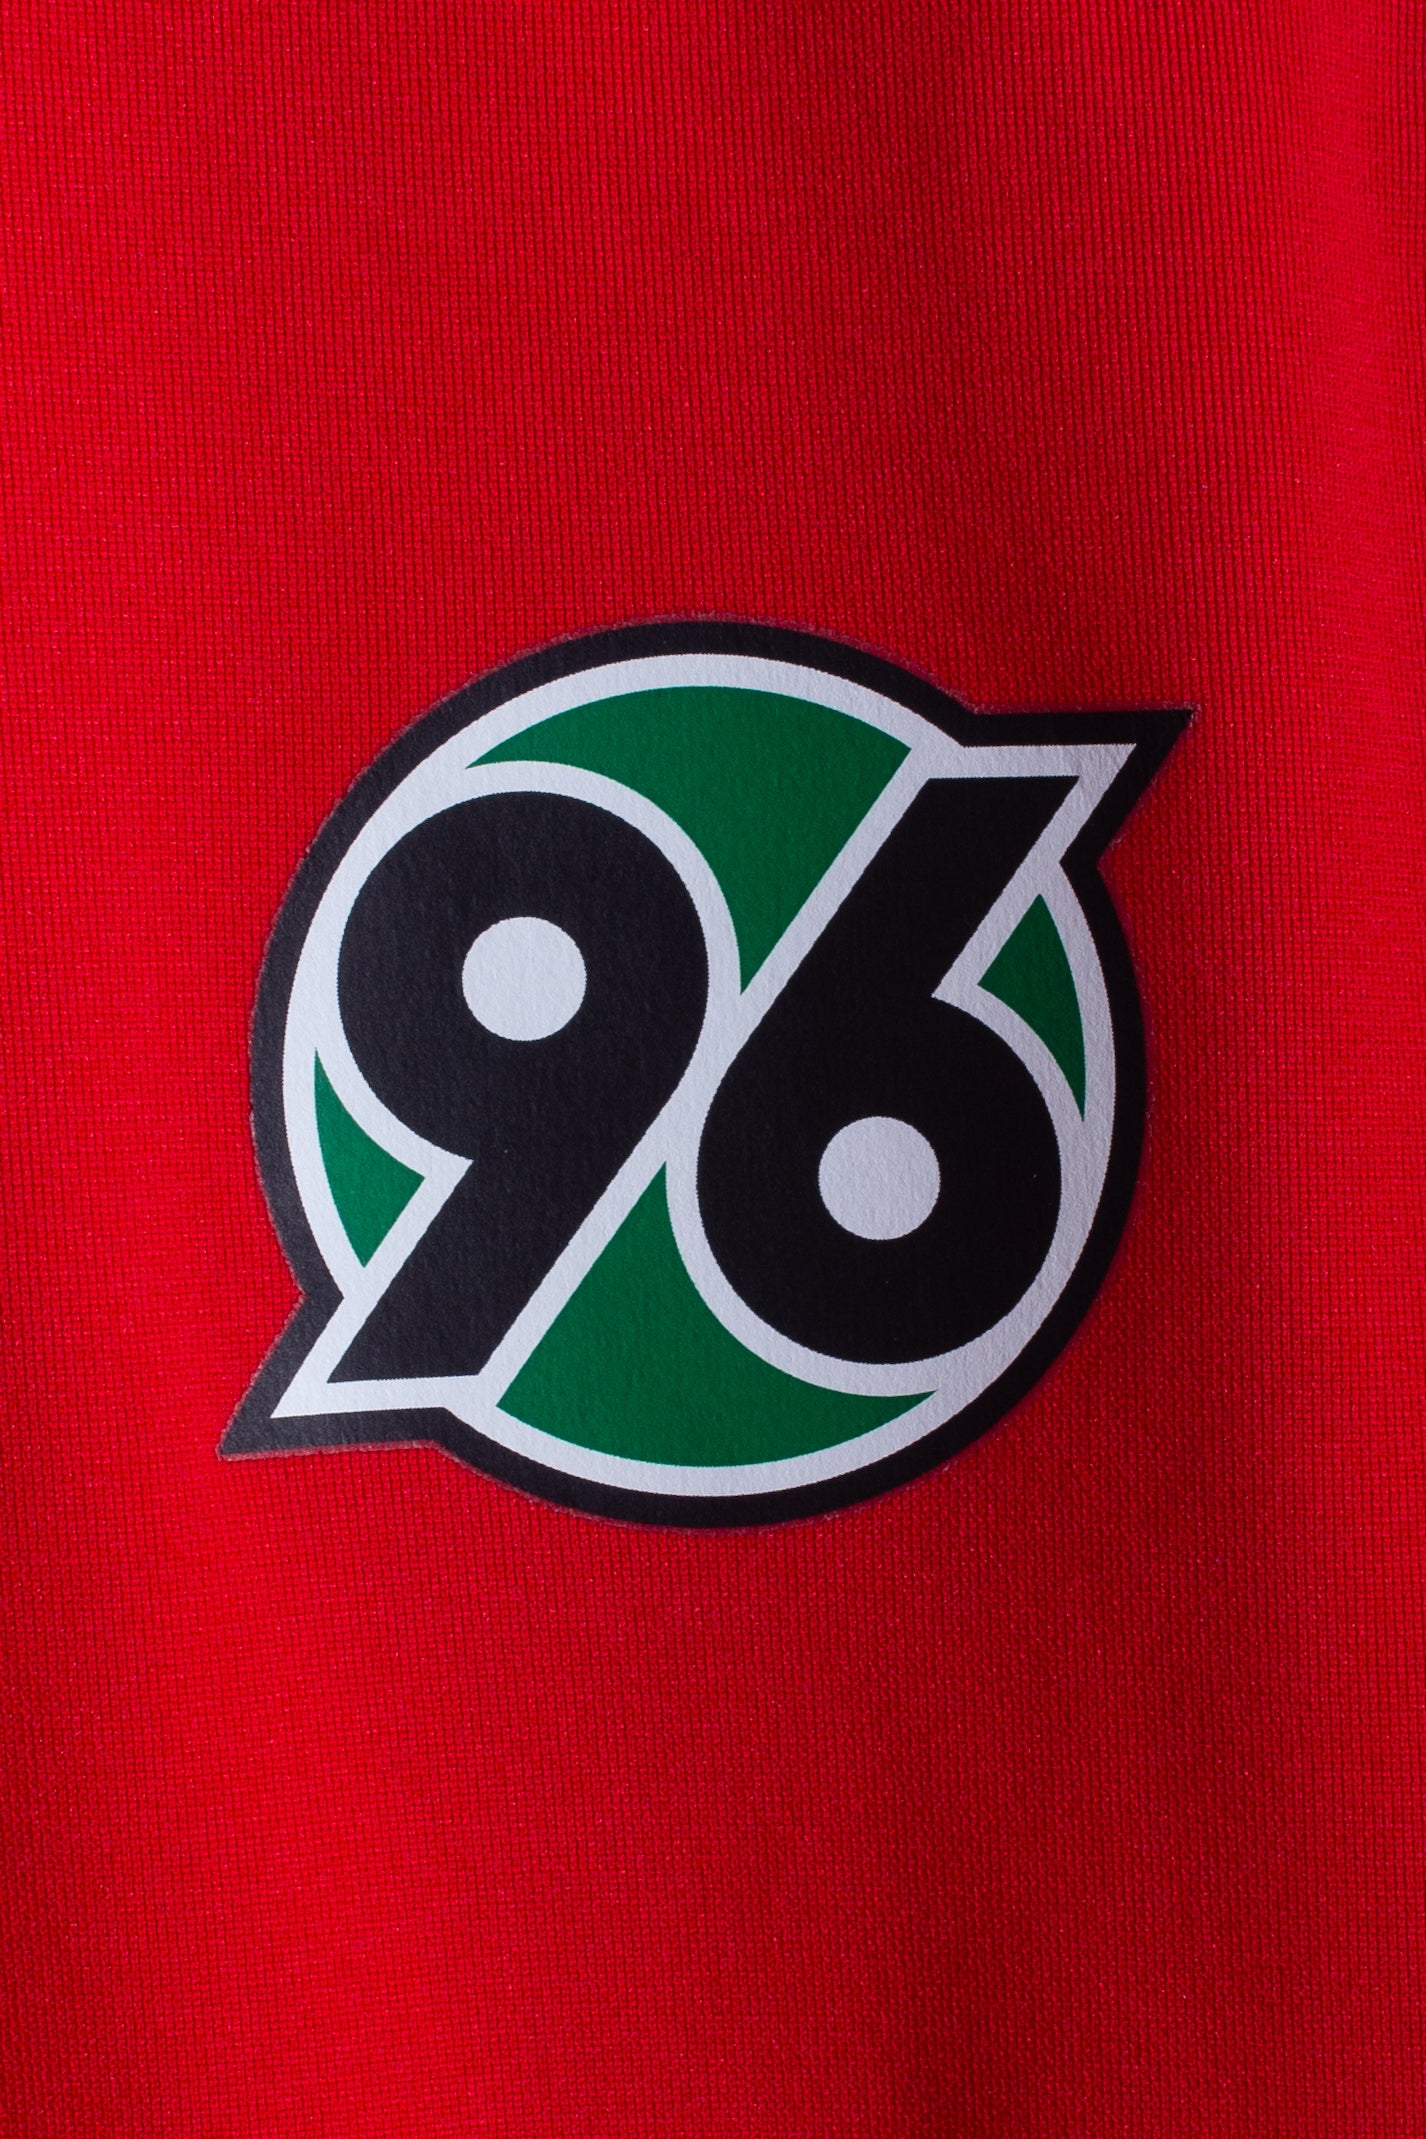 Hannover 96 2008/09 Home Shirt (M)